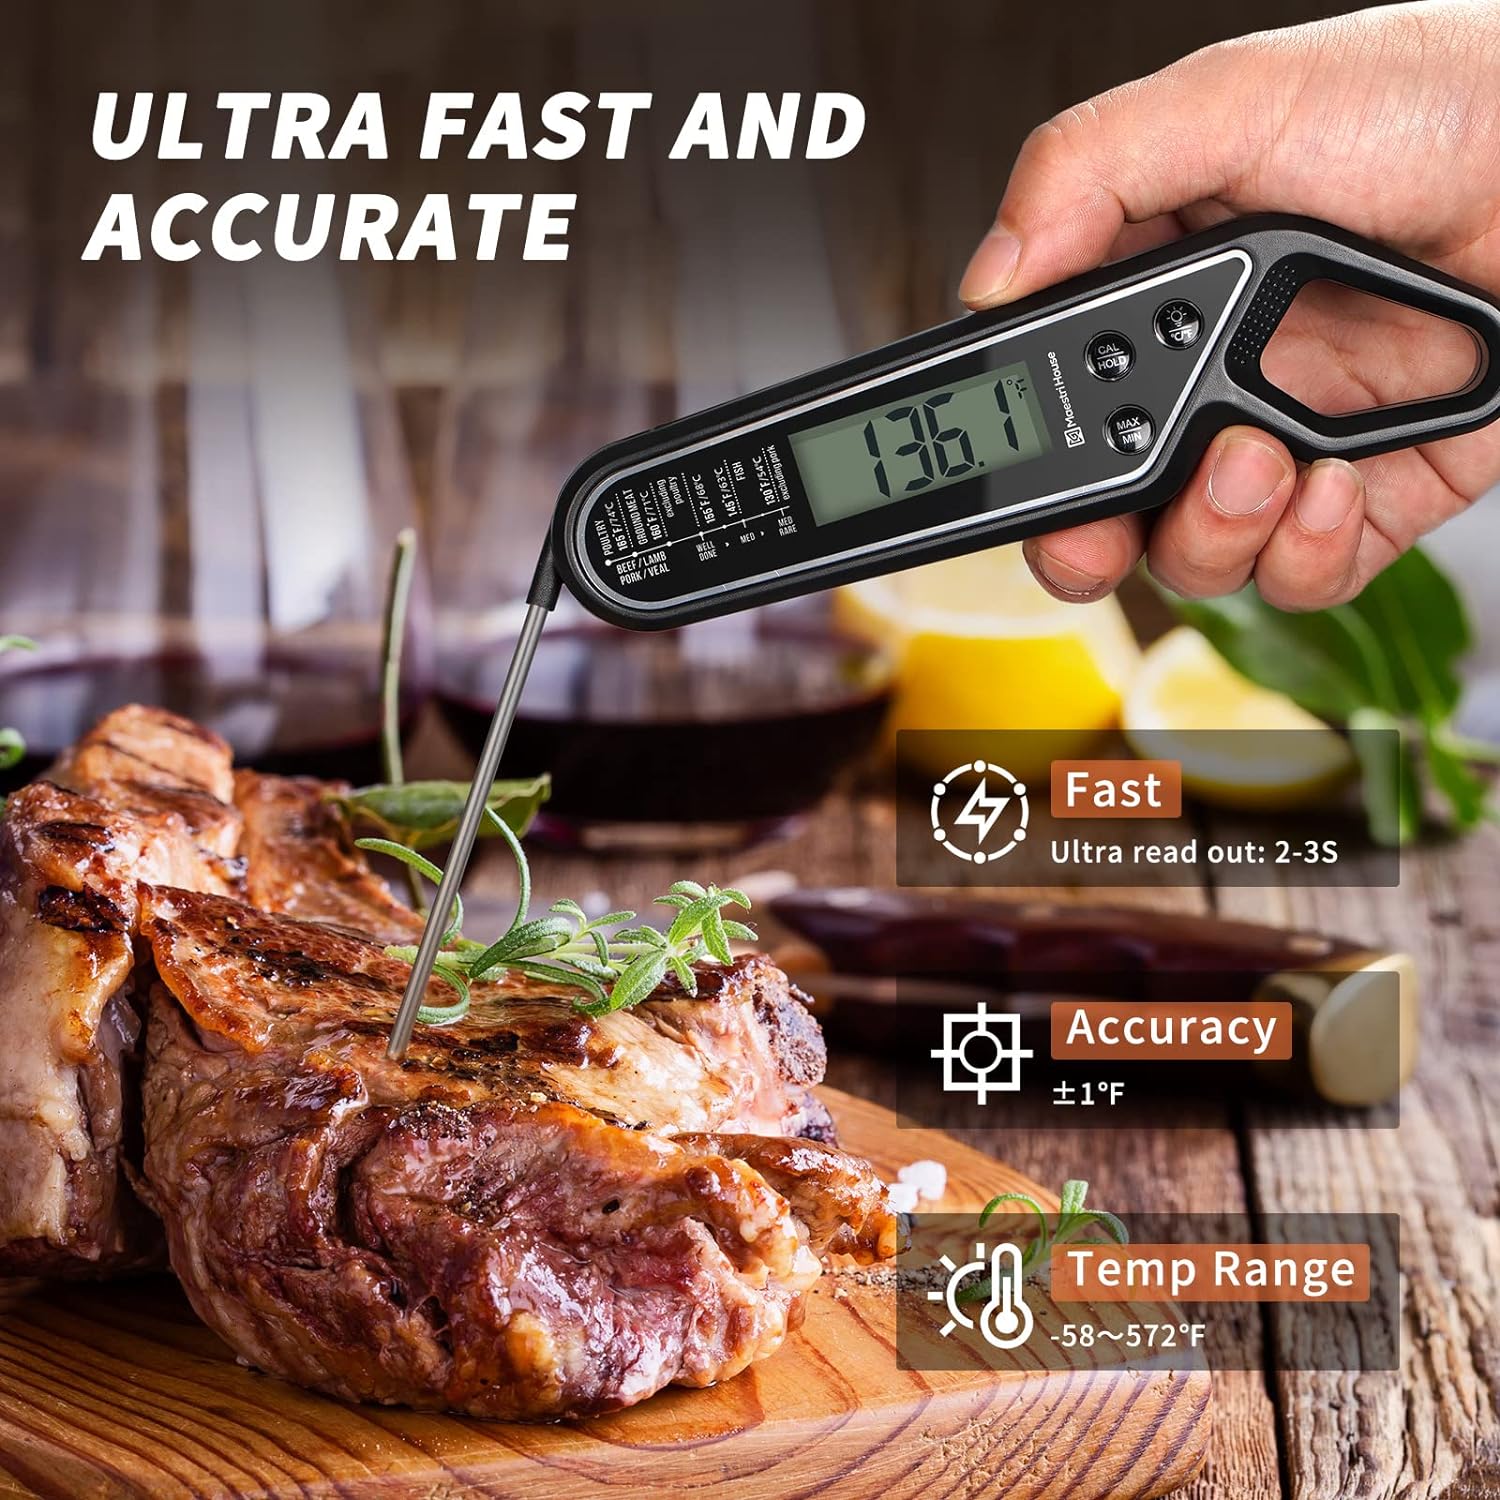 Maestri House Instant Read Meat Thermometer for Cooking, Digital Waterproof Food Thermometer with Backlight, Magnet, Calibration and Foldable Probe for Grill, Kitchen, Baking, BBQ, Candy (Red)